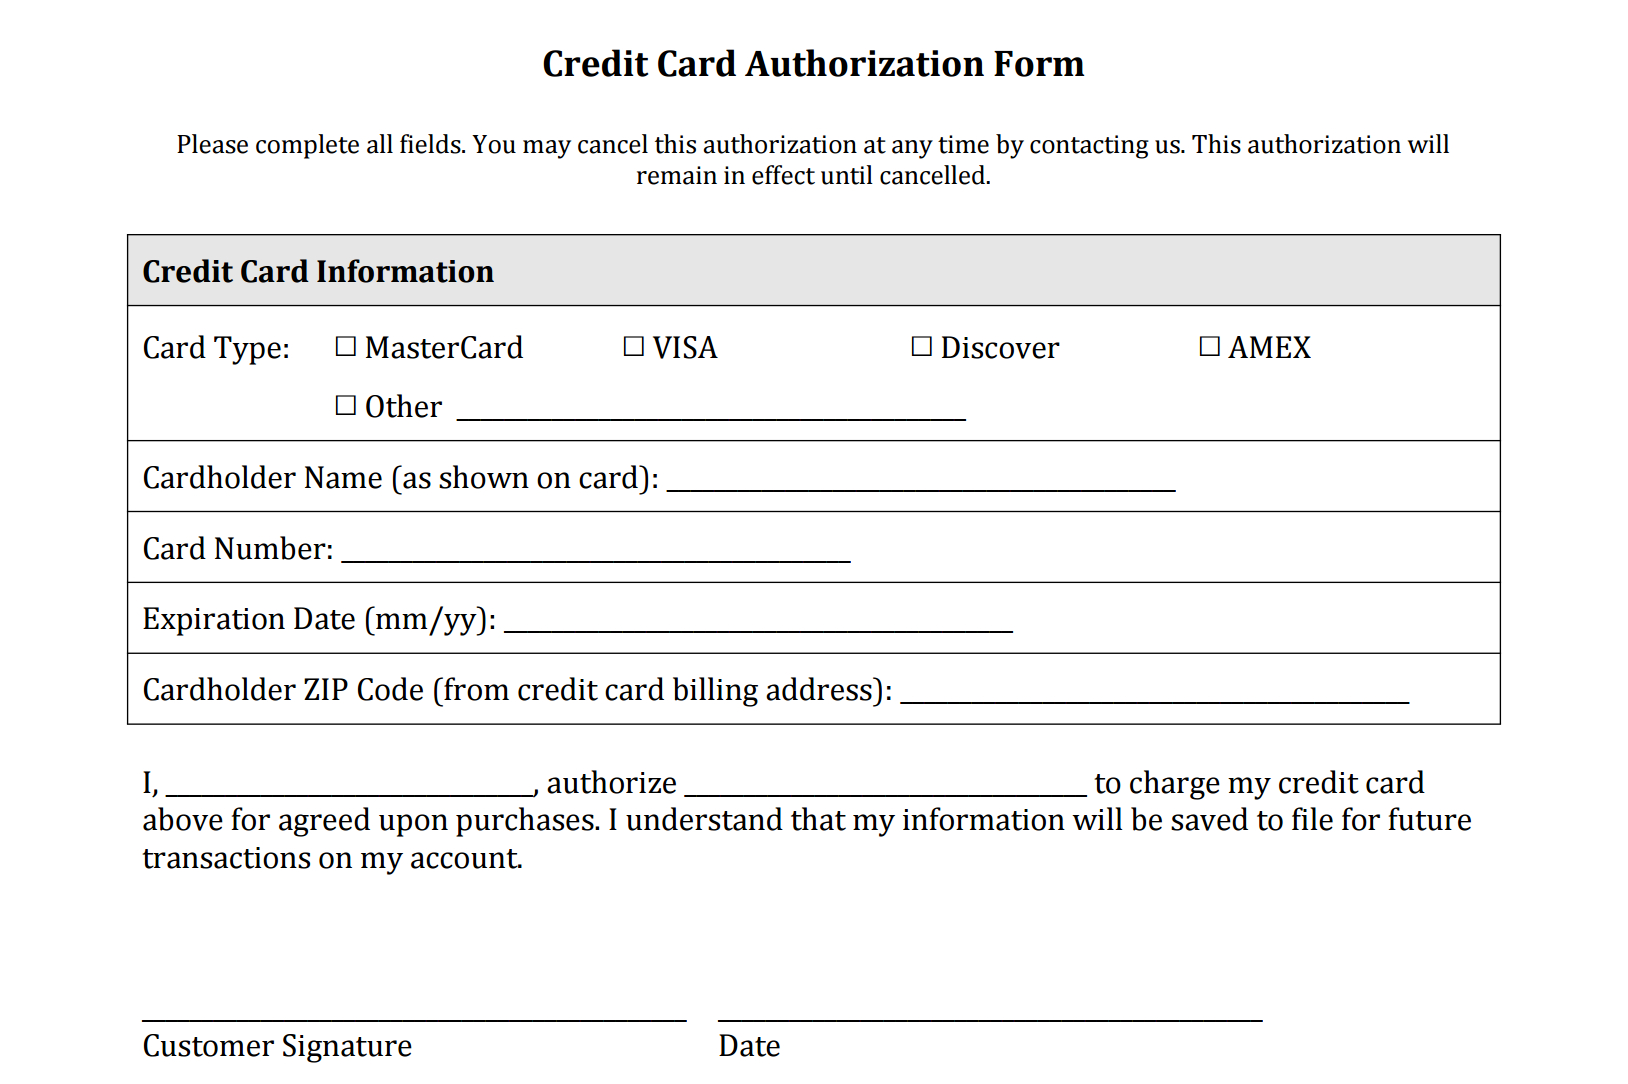 Credit Authorization Form | Types Of Credit Cards, Credit With Credit Card On File Form Templates